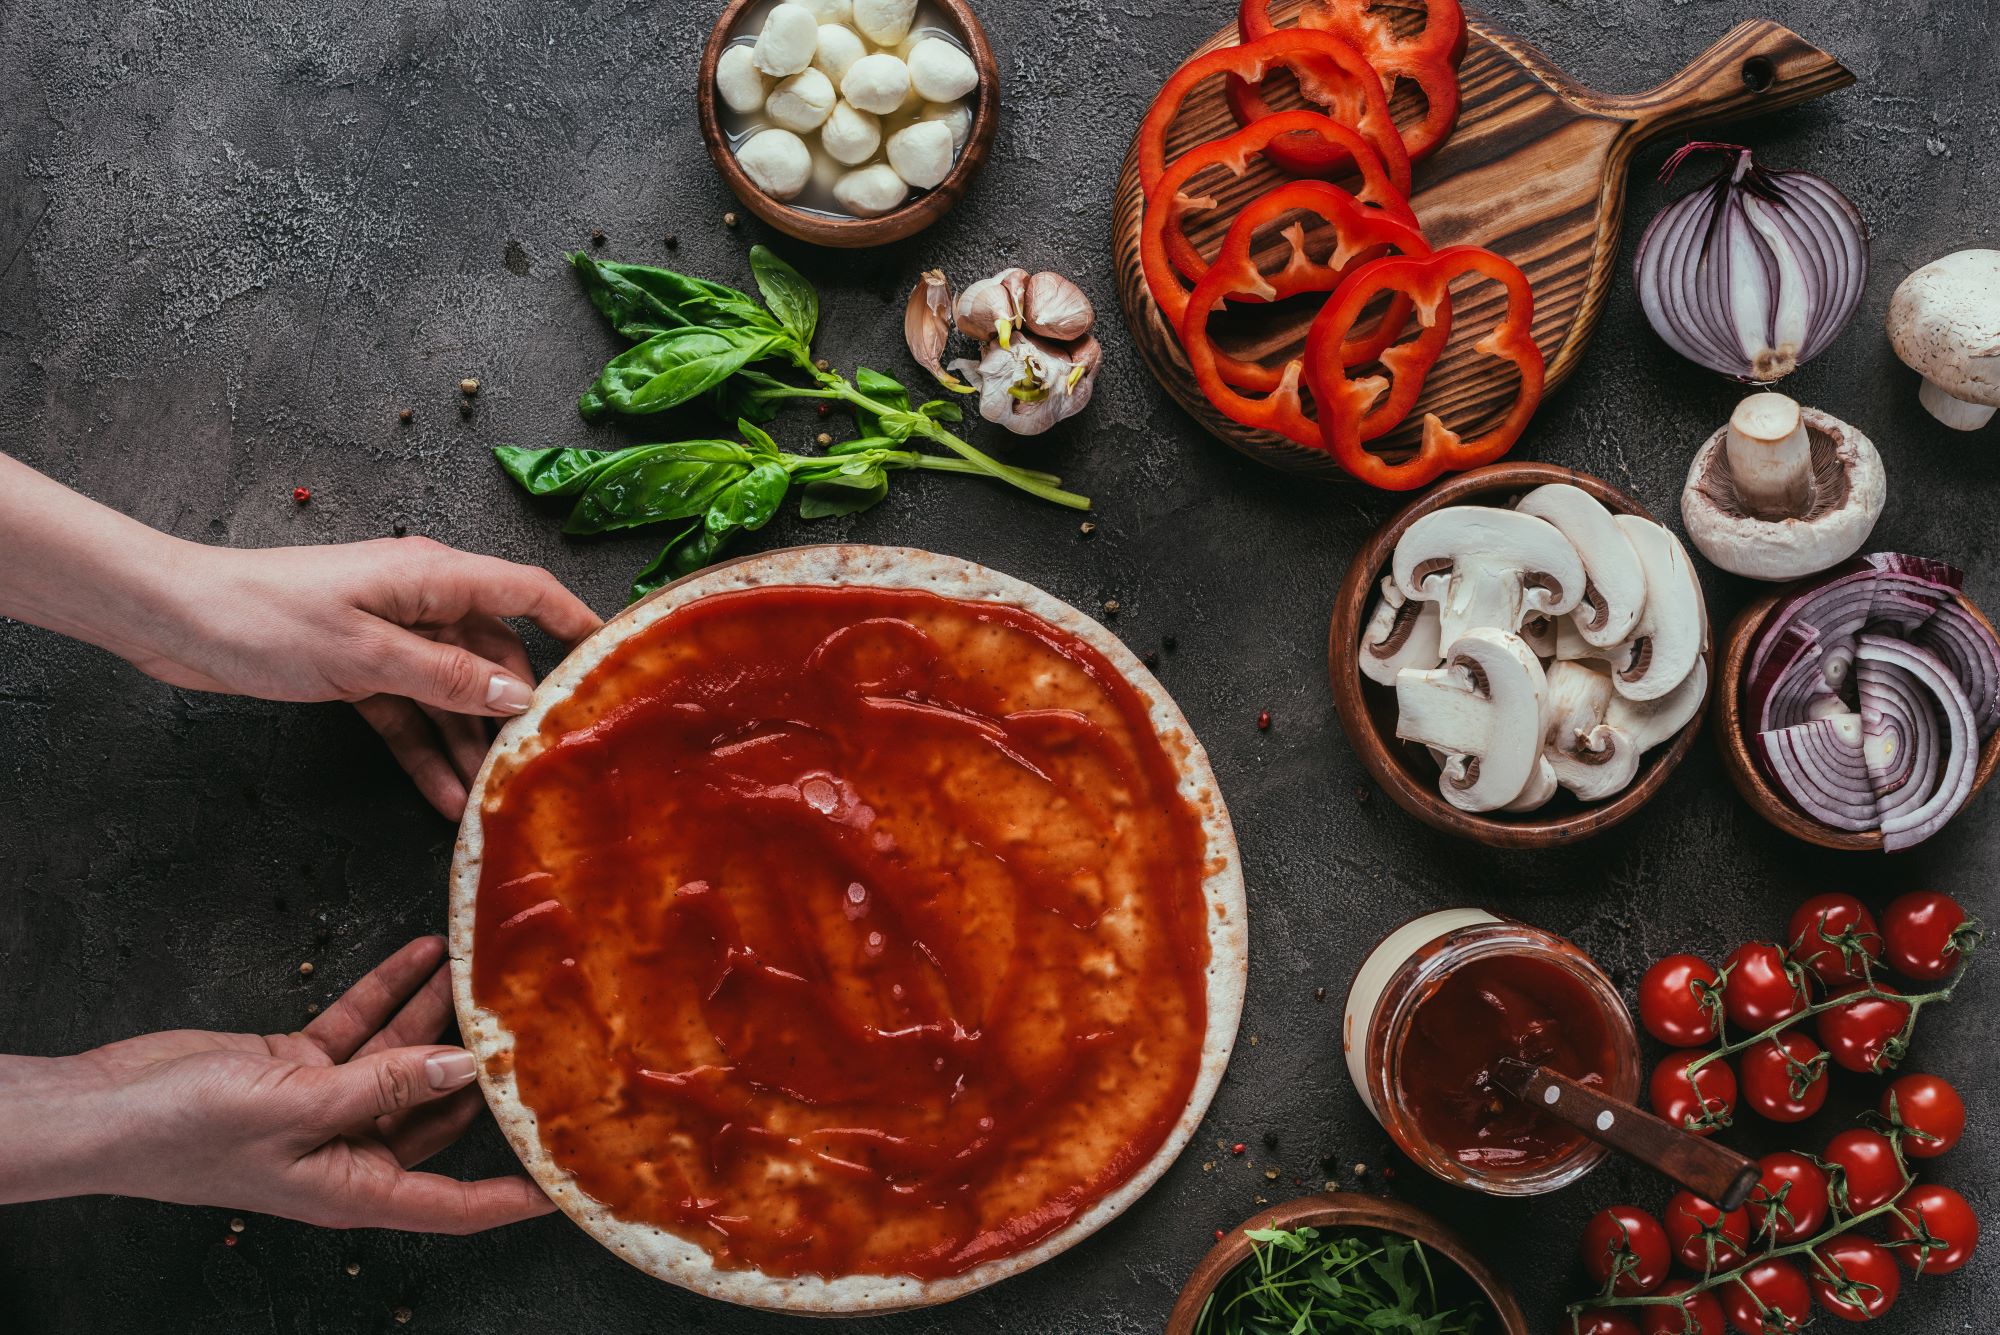 a flat lay image of pizza dough with sauce on top, surrounded by colorful vegetables that will be used as toppings